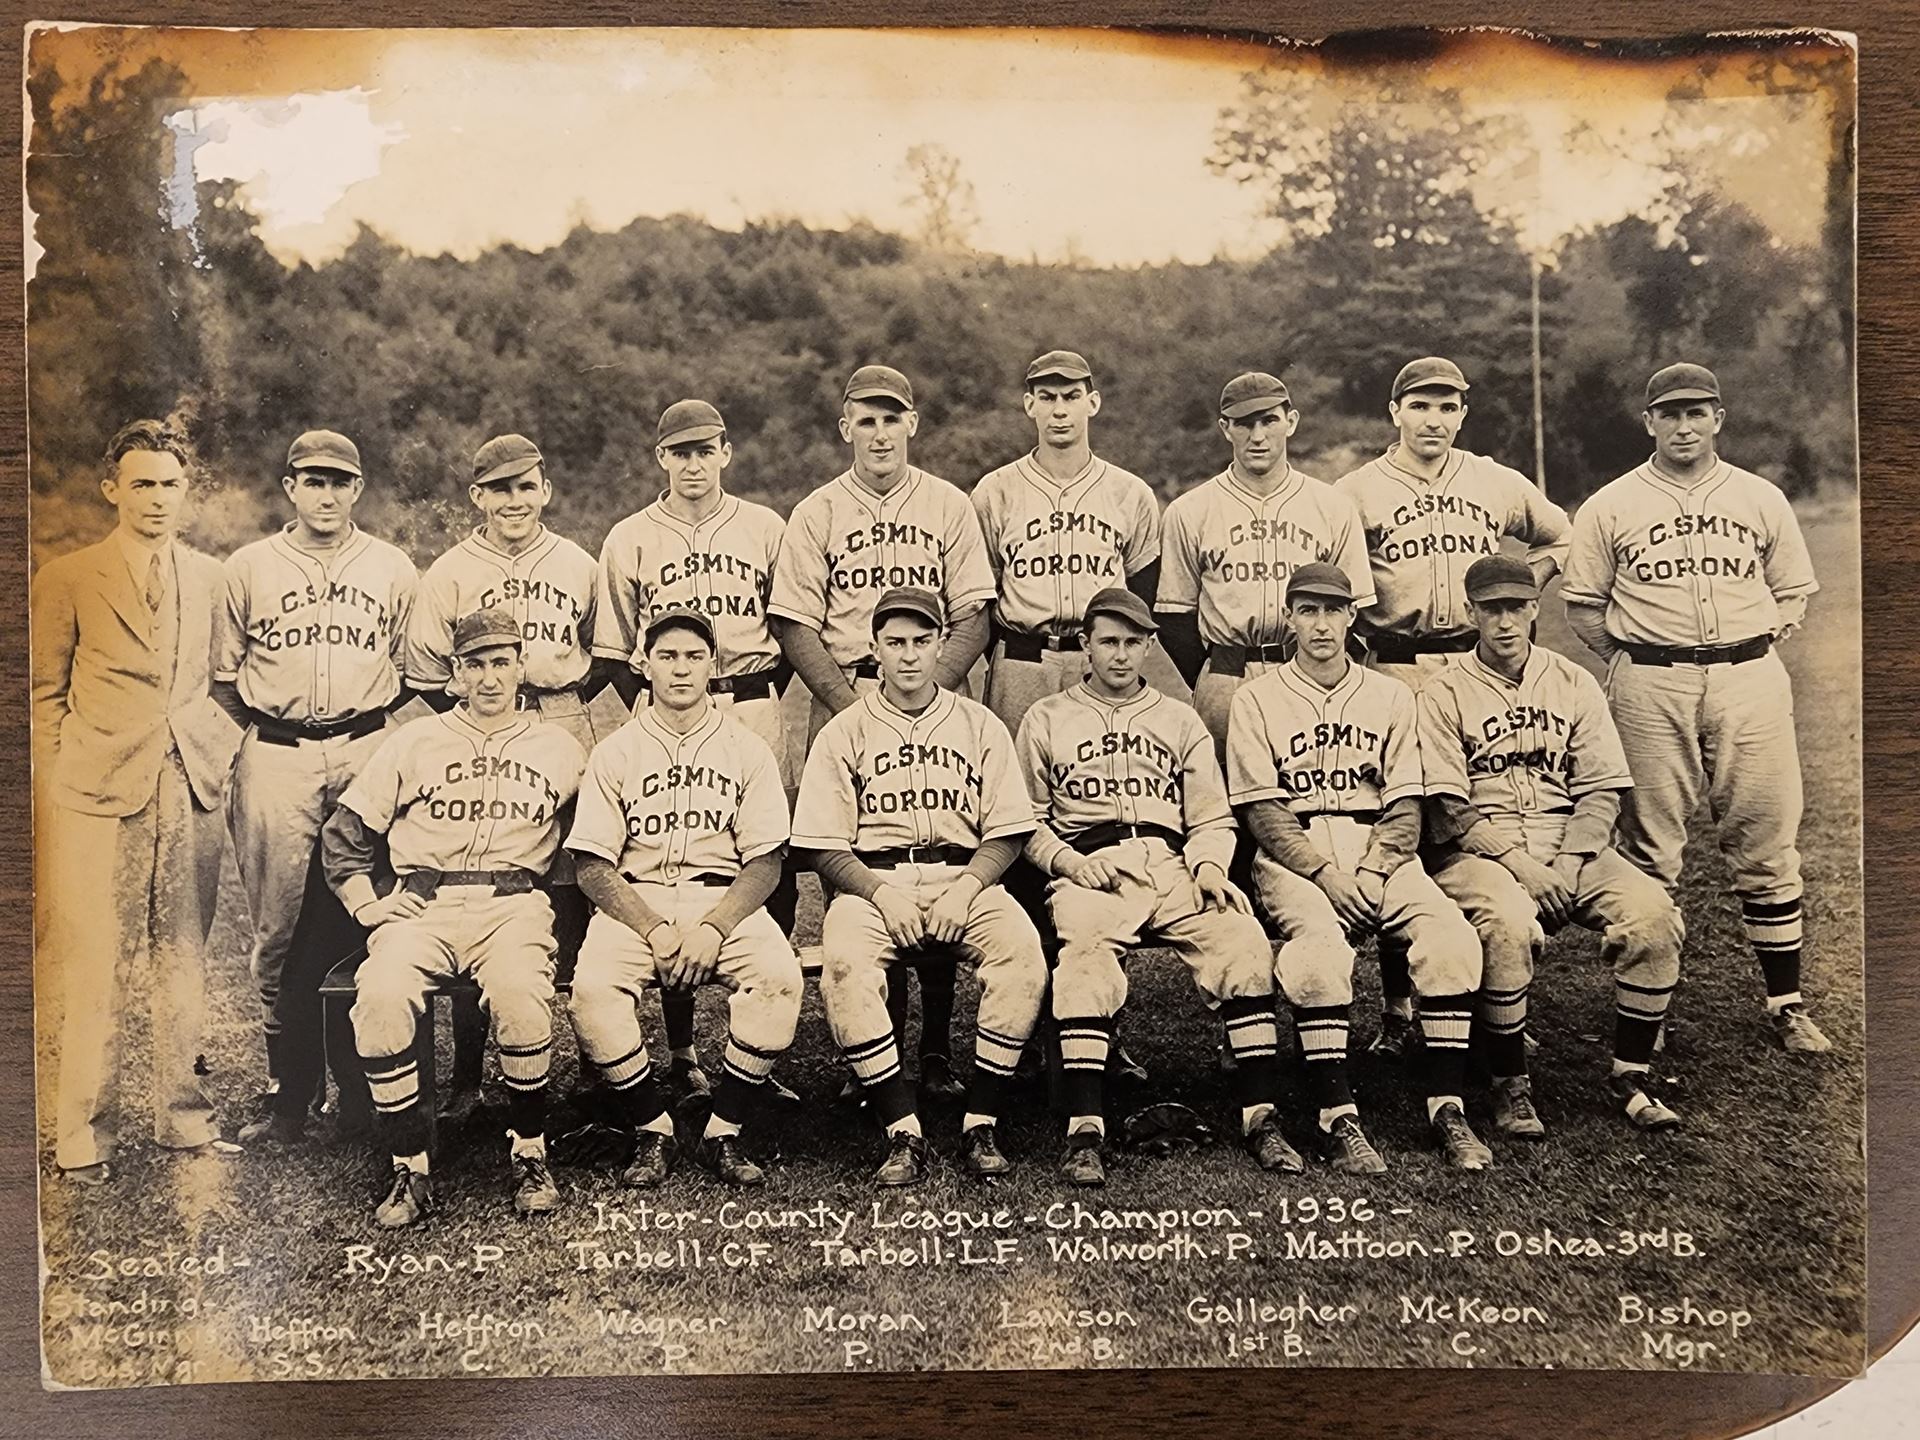 Image of the 1936 Inter-County League Champions of the L. C. Smith Corona League. The baseball team is arranged in two rows, and the player names are written on the bottom of the image.